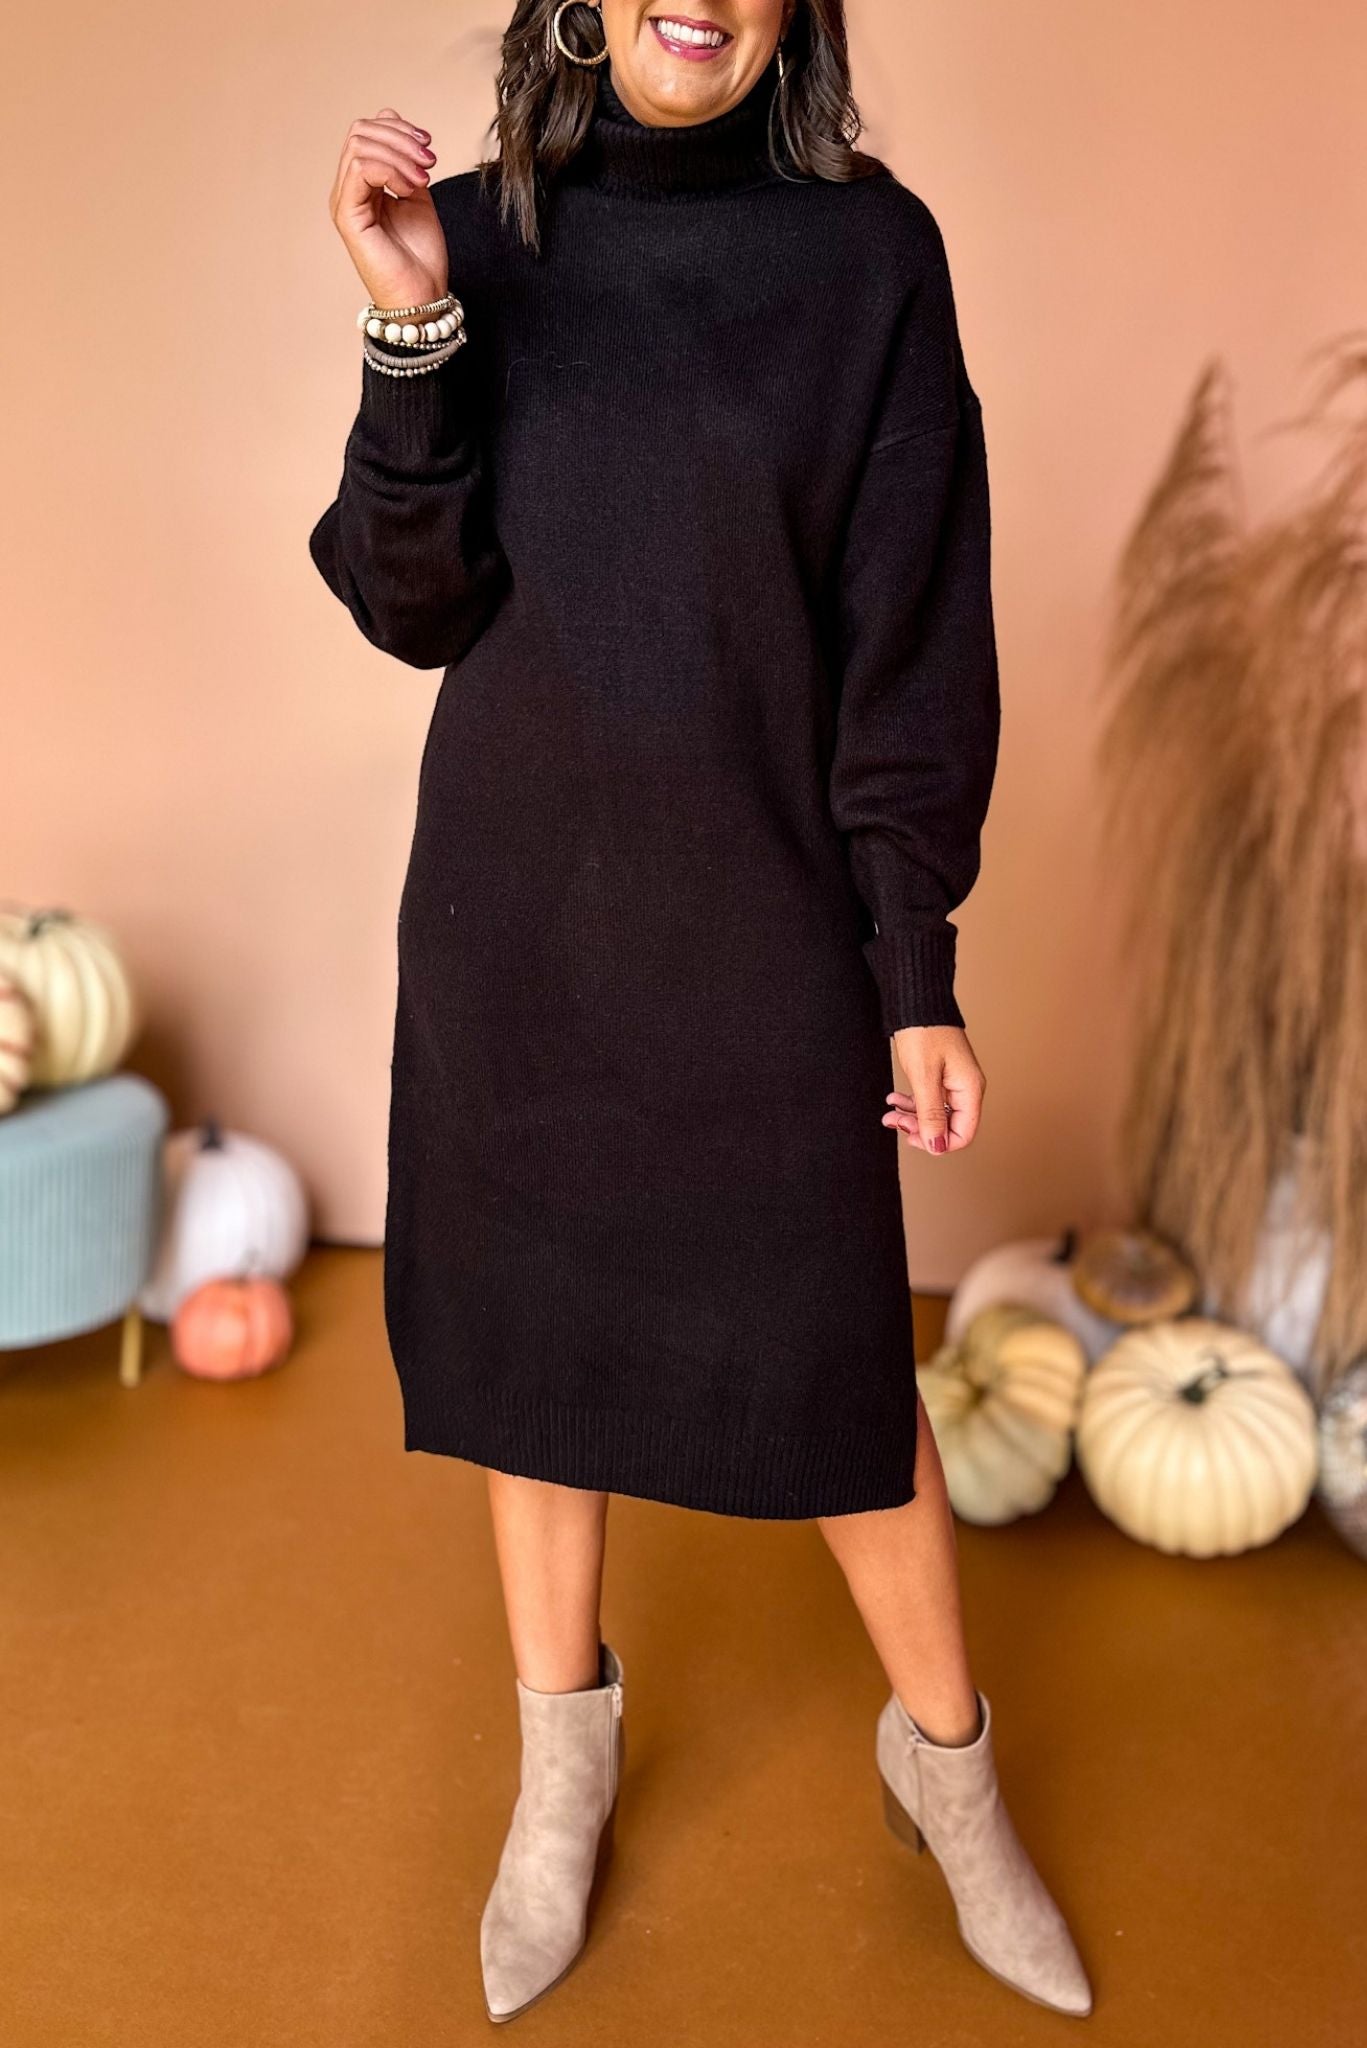 Black Turtleneck Sweater Midi Dress, must have dress, must have style, fall style, fall fashion, elevated style, elevated dress, mom style, fall collection, fall dress, shop style your senses by mallory fitzsimmons